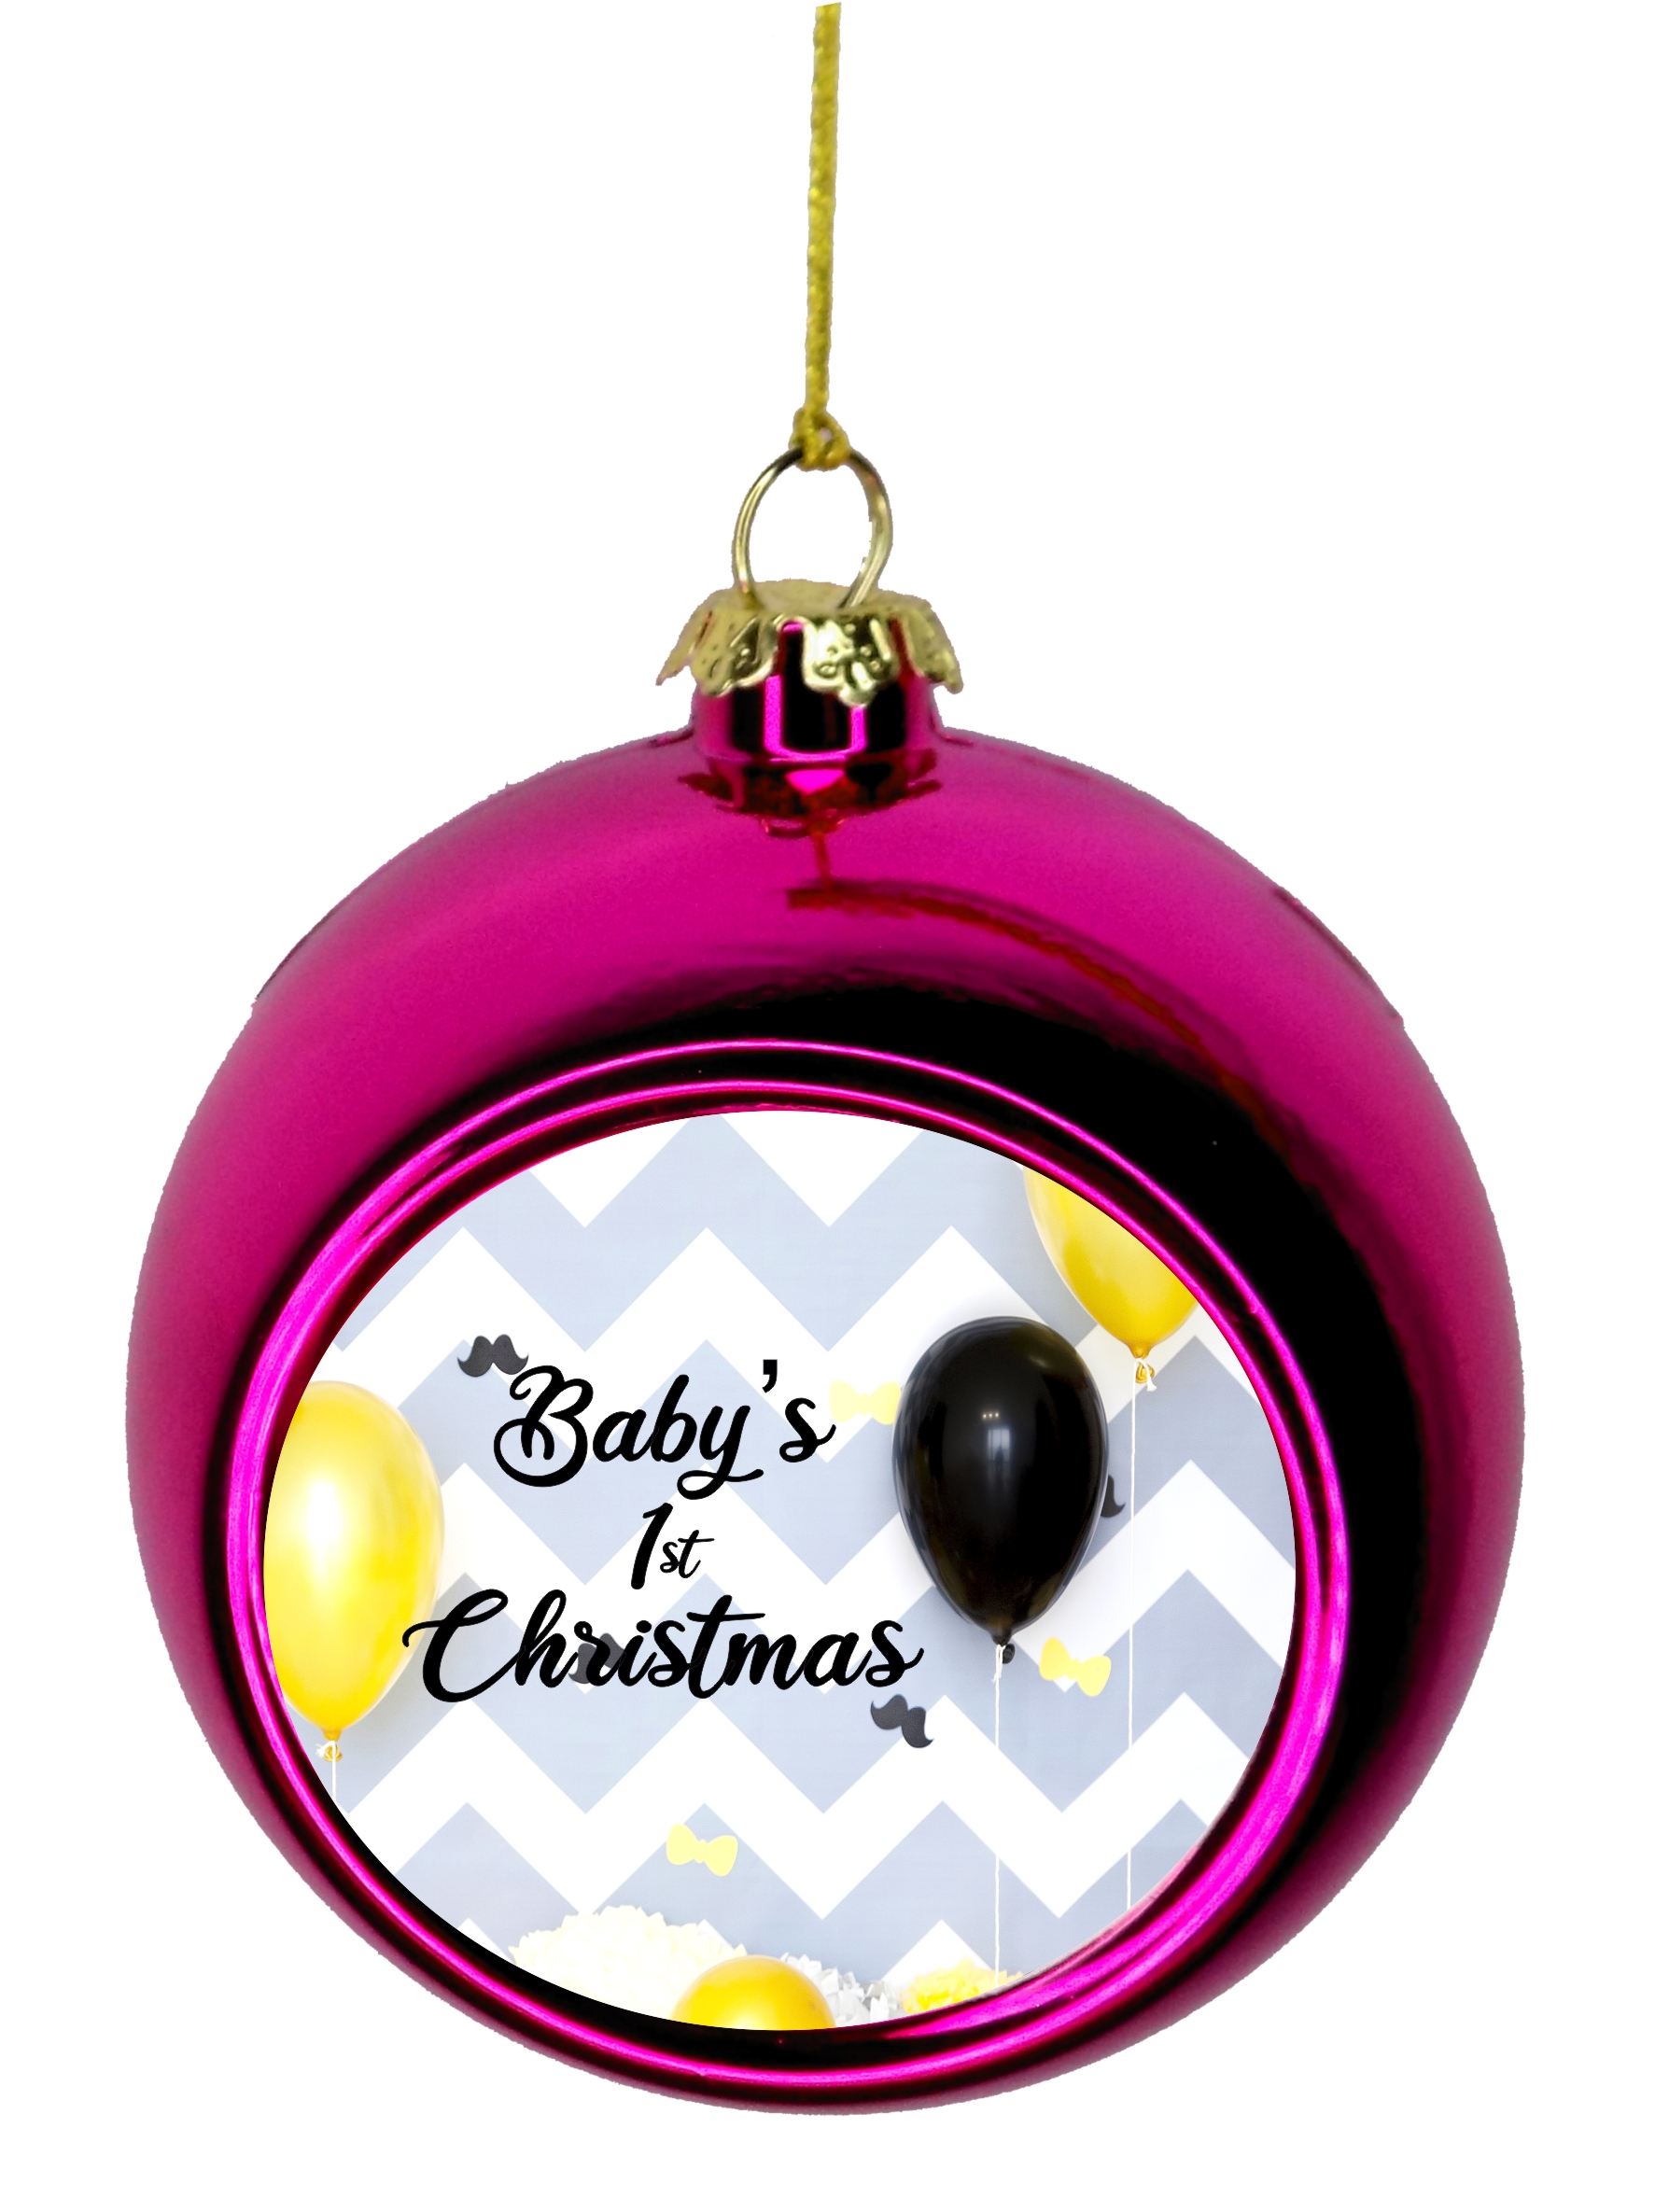 Babys First Christmas Xmas Ornament New Baby First Year Ornament  - Baby 1st Xmas Ornament - Baby 1st Christmas Ornament Christmas DÃ©cor Pink Ball Ornaments - image 1 of 1